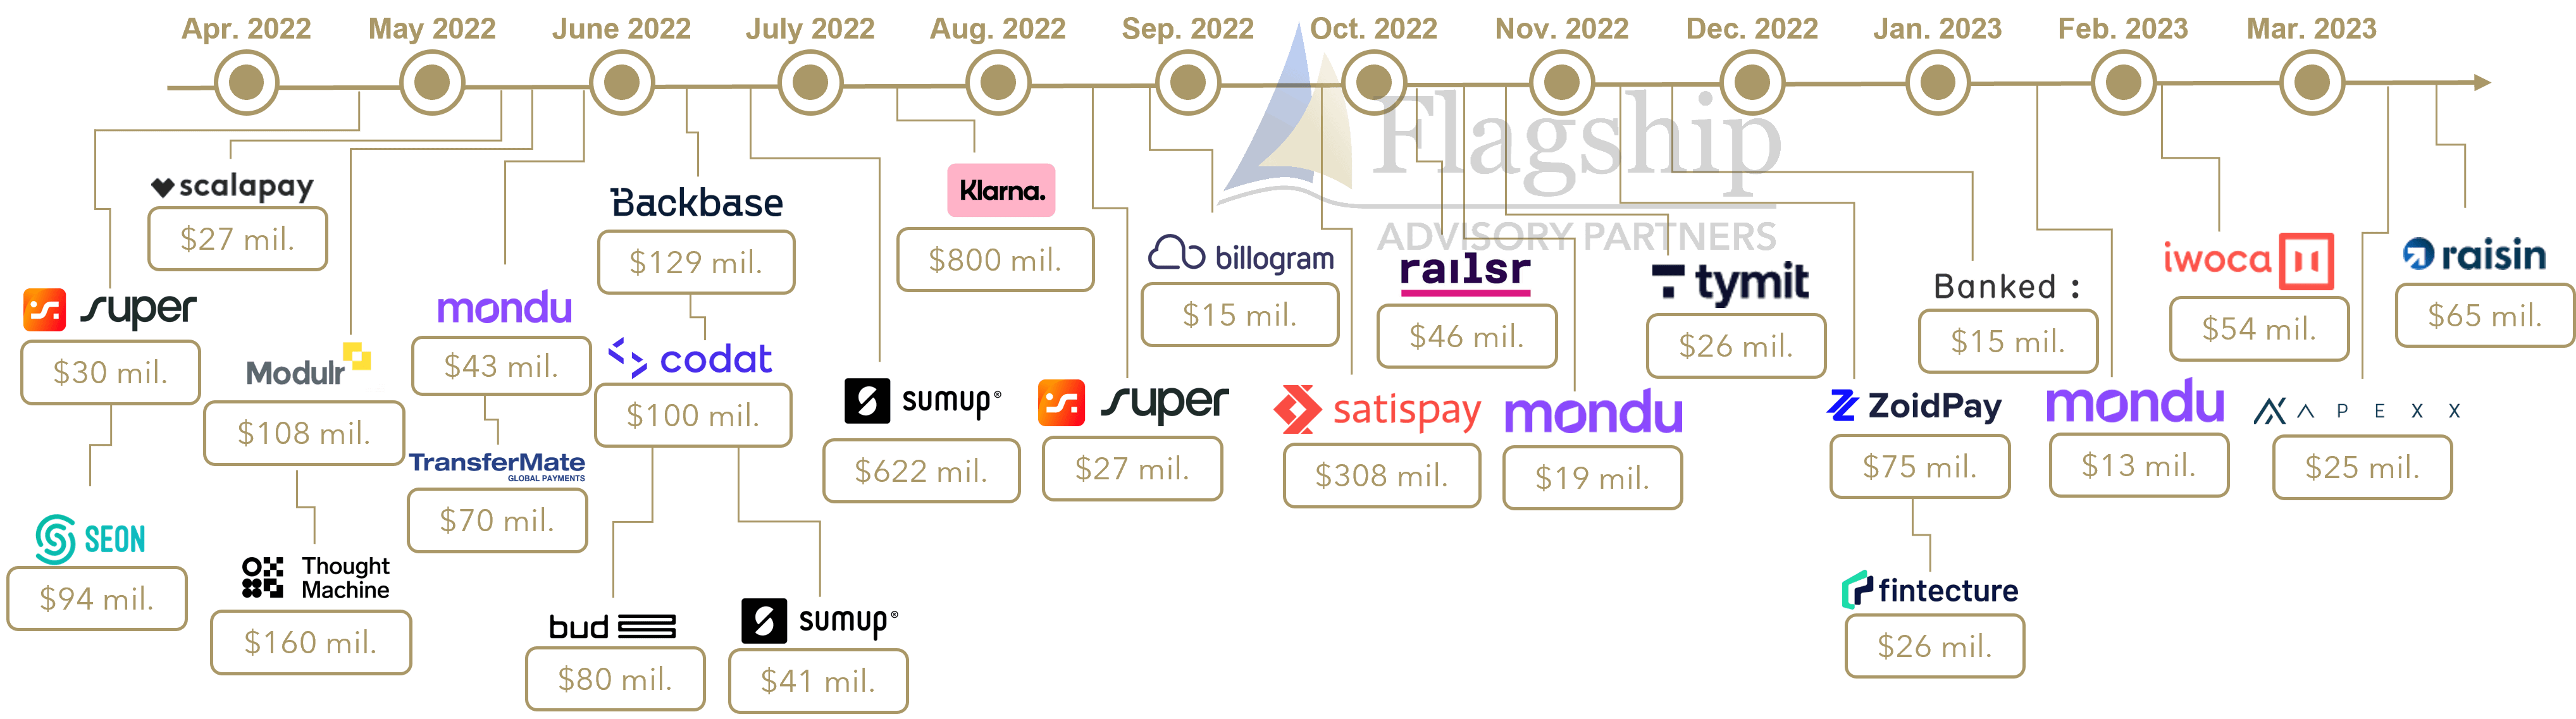 Timeline of notable fintech fundraising (Q2’22 – Q1’23)